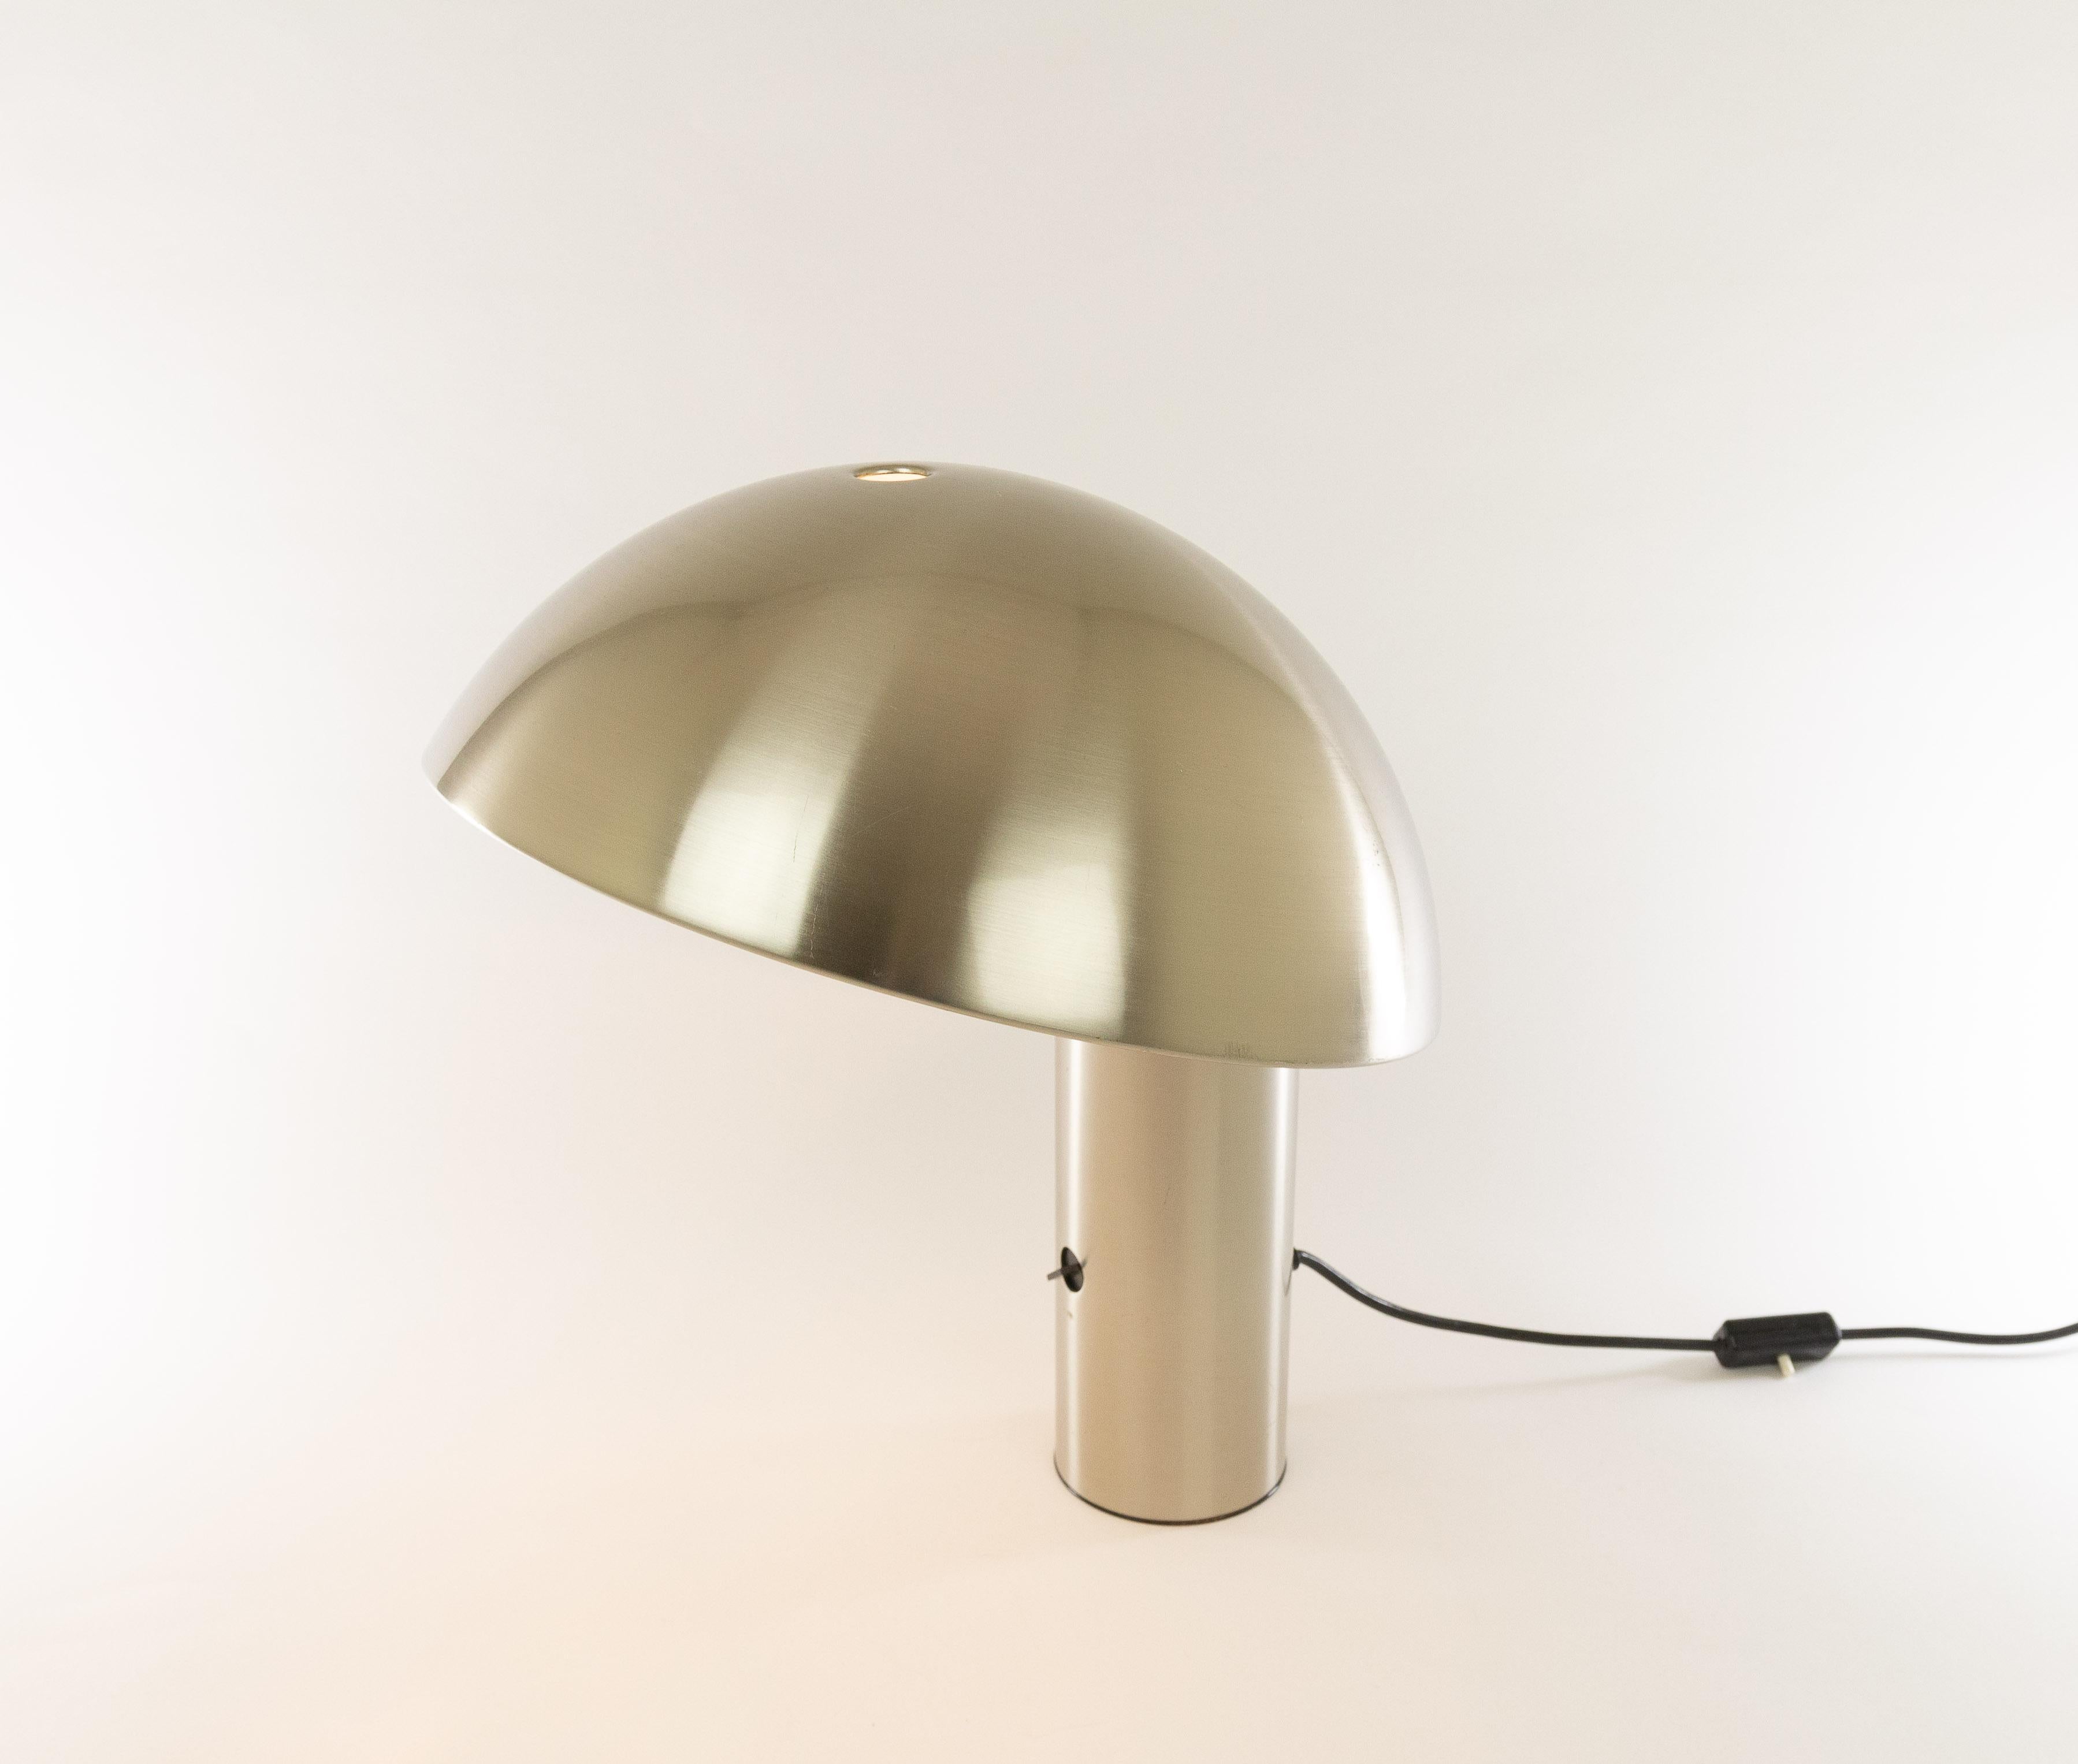 Silver colored Vaga table lamp, designed by Franco Mirenzi and produced by Valenti Luce in 1978.

The relatively heavy base provides a solid balance for the fairly large round metal top of the lamp. The lamp is made of metal and includes a